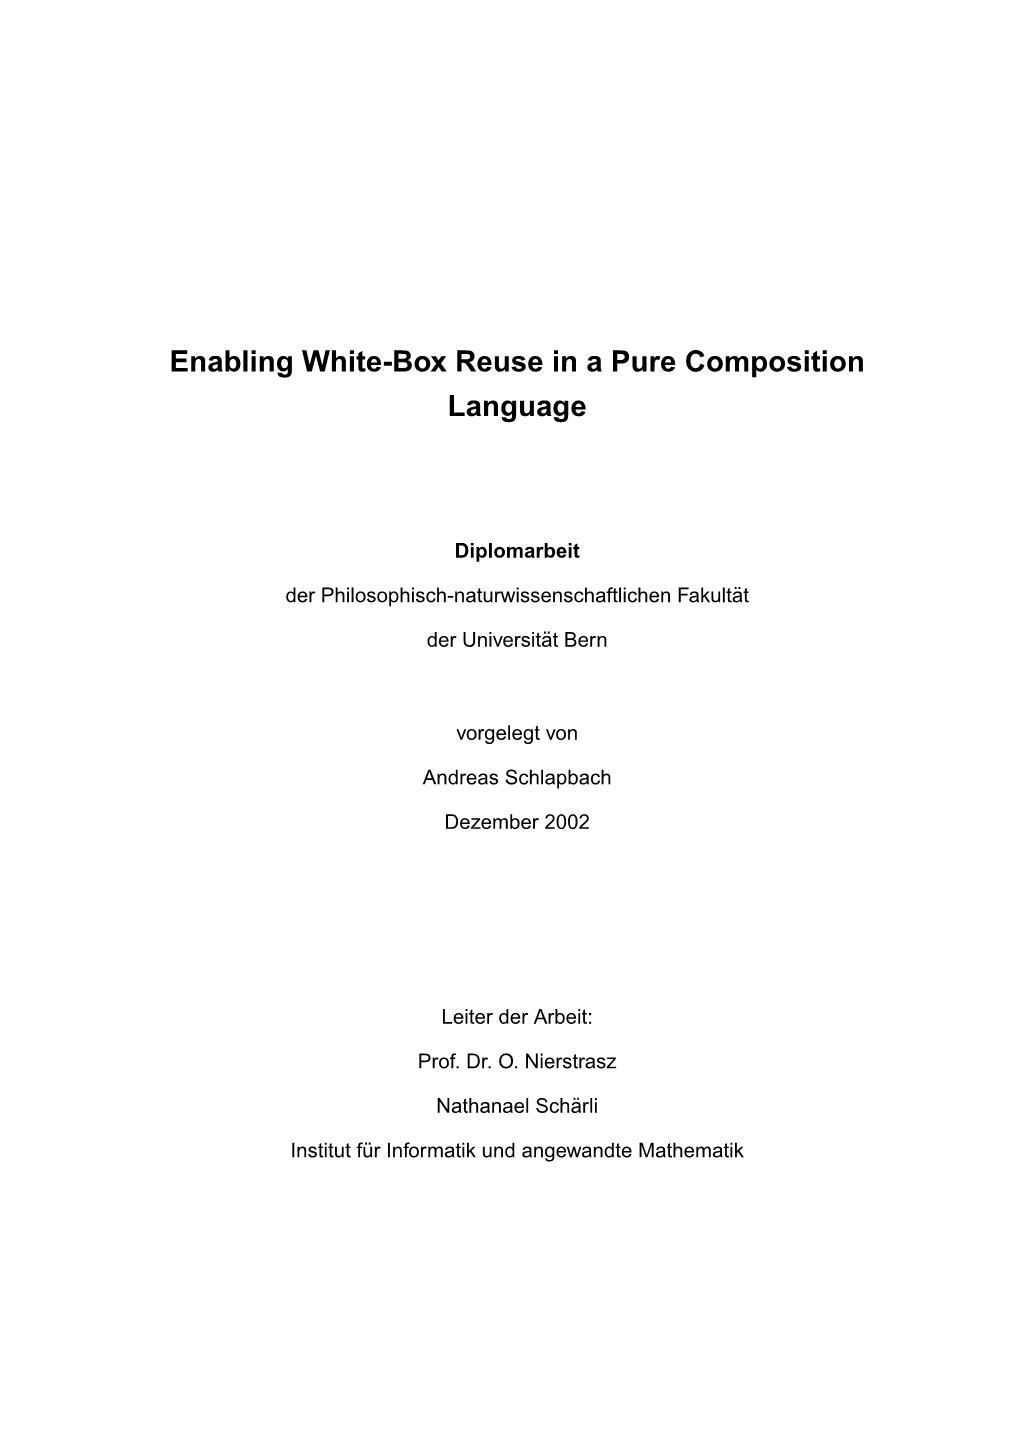 Enabling White-Box Reuse in a Pure Composition Language